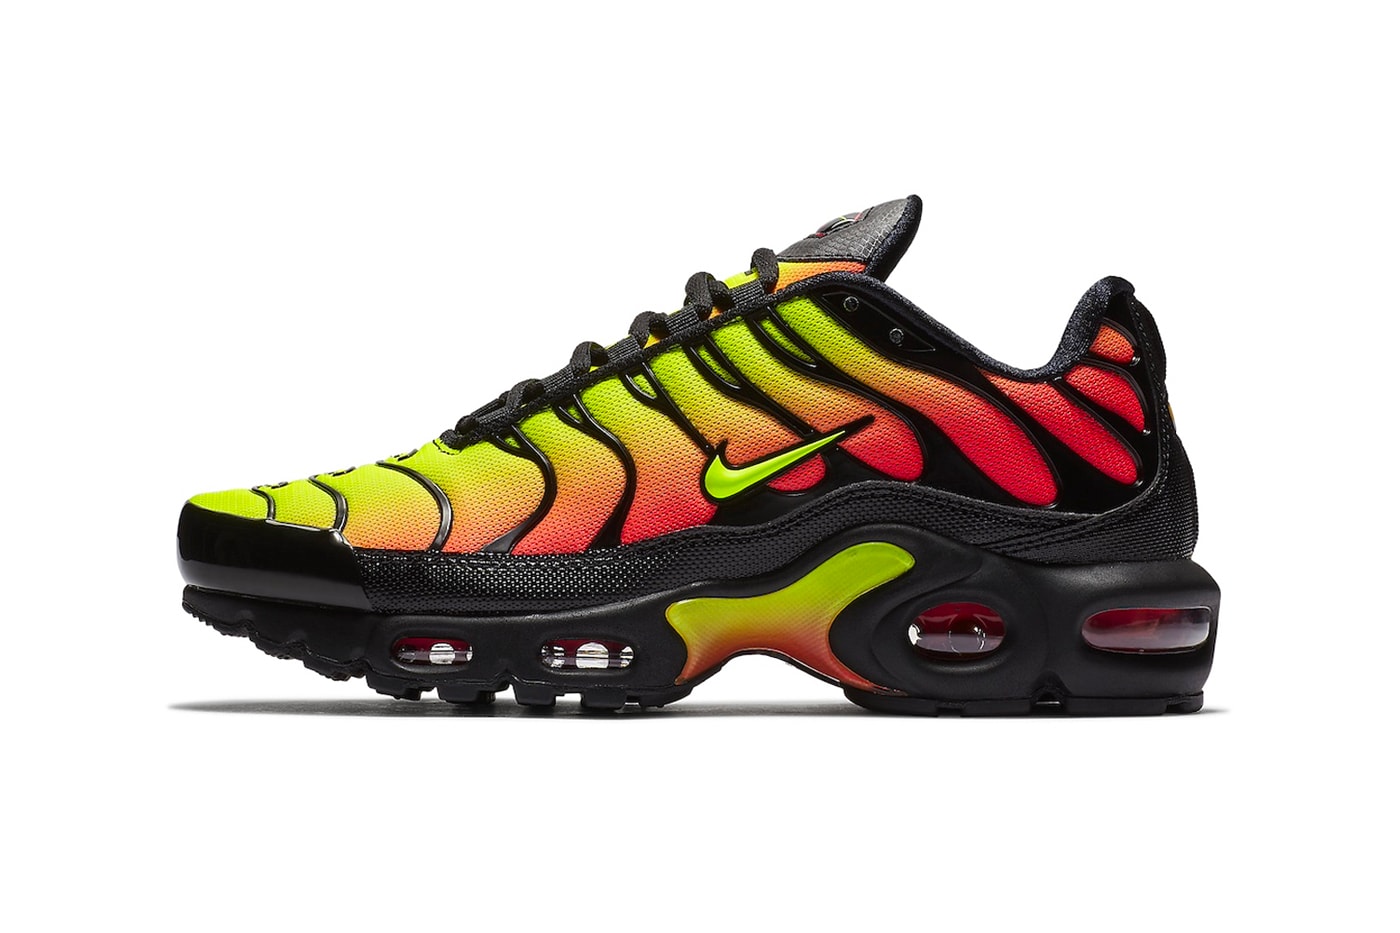 Nike Air Max Plus "Volt/Solar Red" Slated To Return Late This Year AQ9979-001 black volt solar red swoosh technical shoe vibrant neon